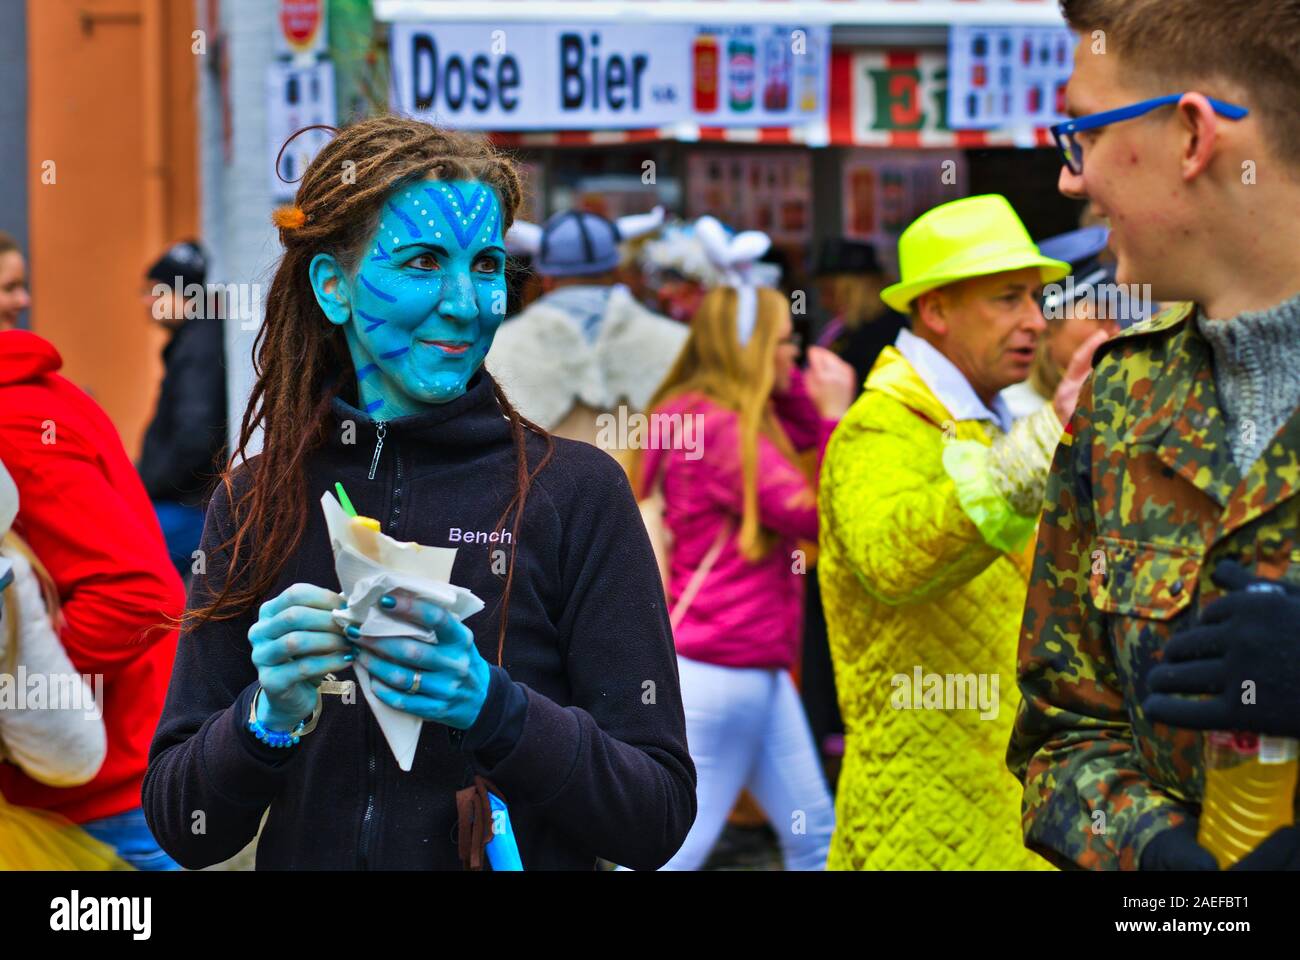 Real costumed people in carnival costume celebrating the opening of the 2020 season in Cologne, Germany, Stock Photo